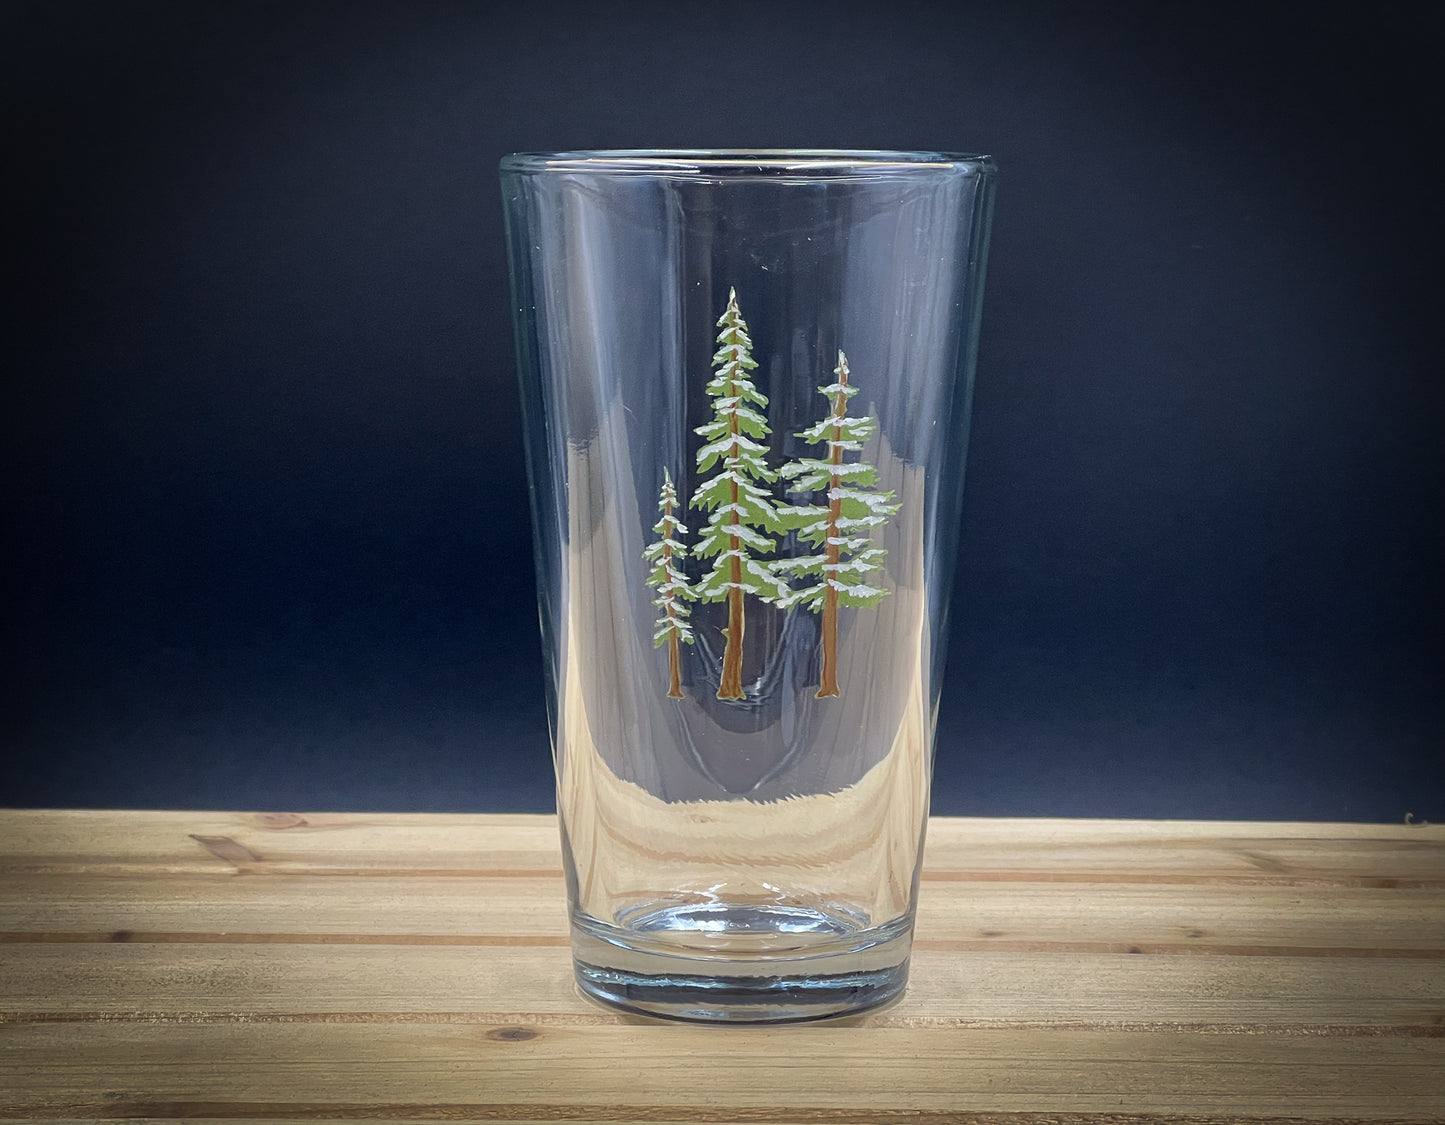 Snowy Trees - Hand Painted Pint glass